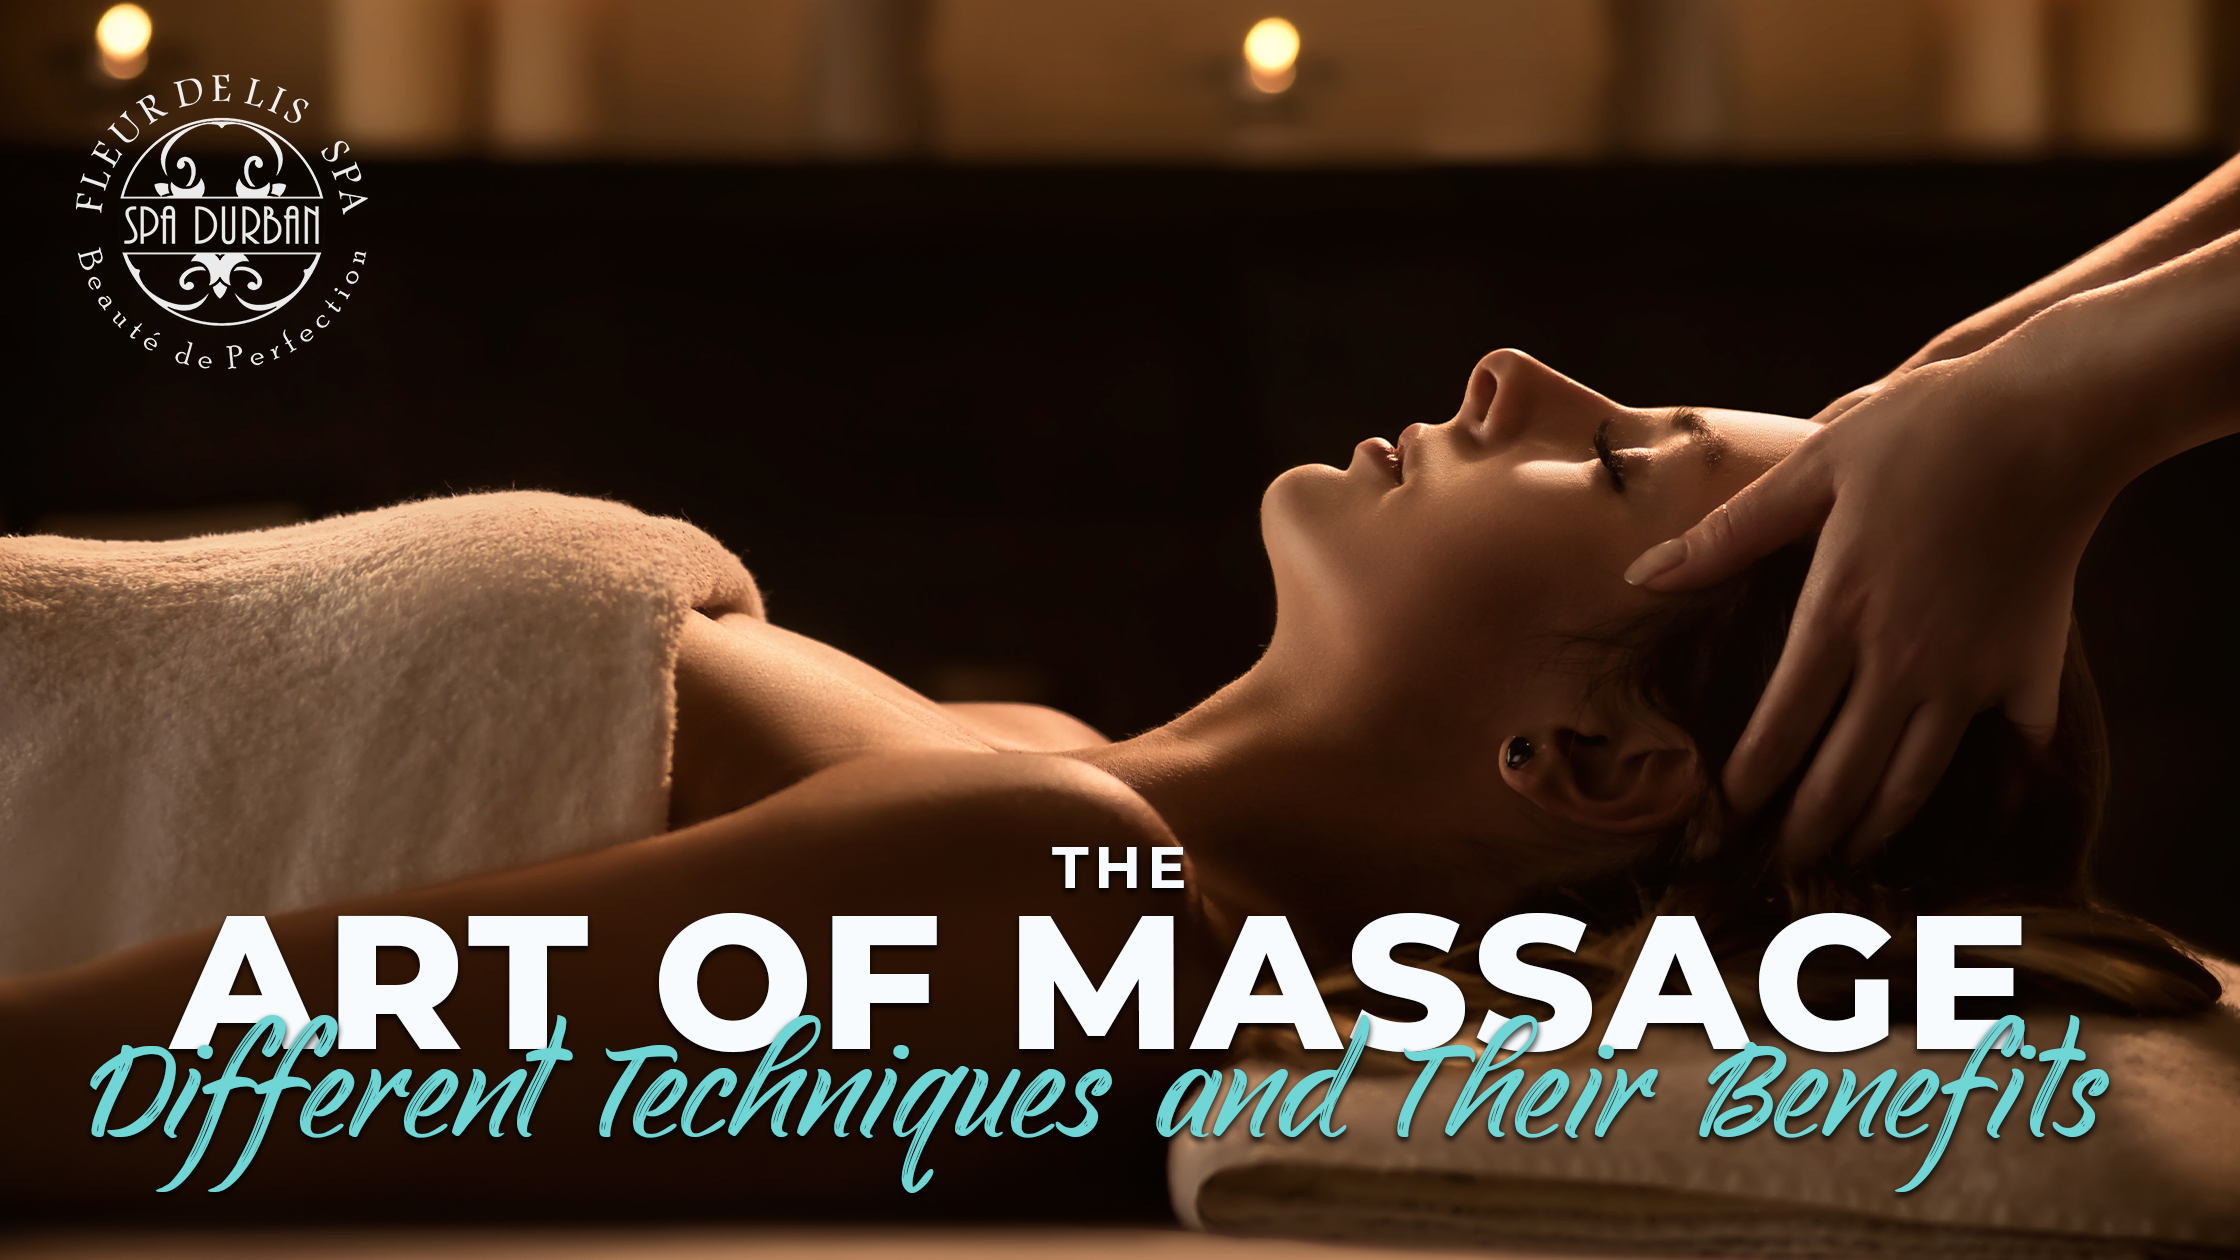 The Art of Massage: Different Techniques and Their Benefits